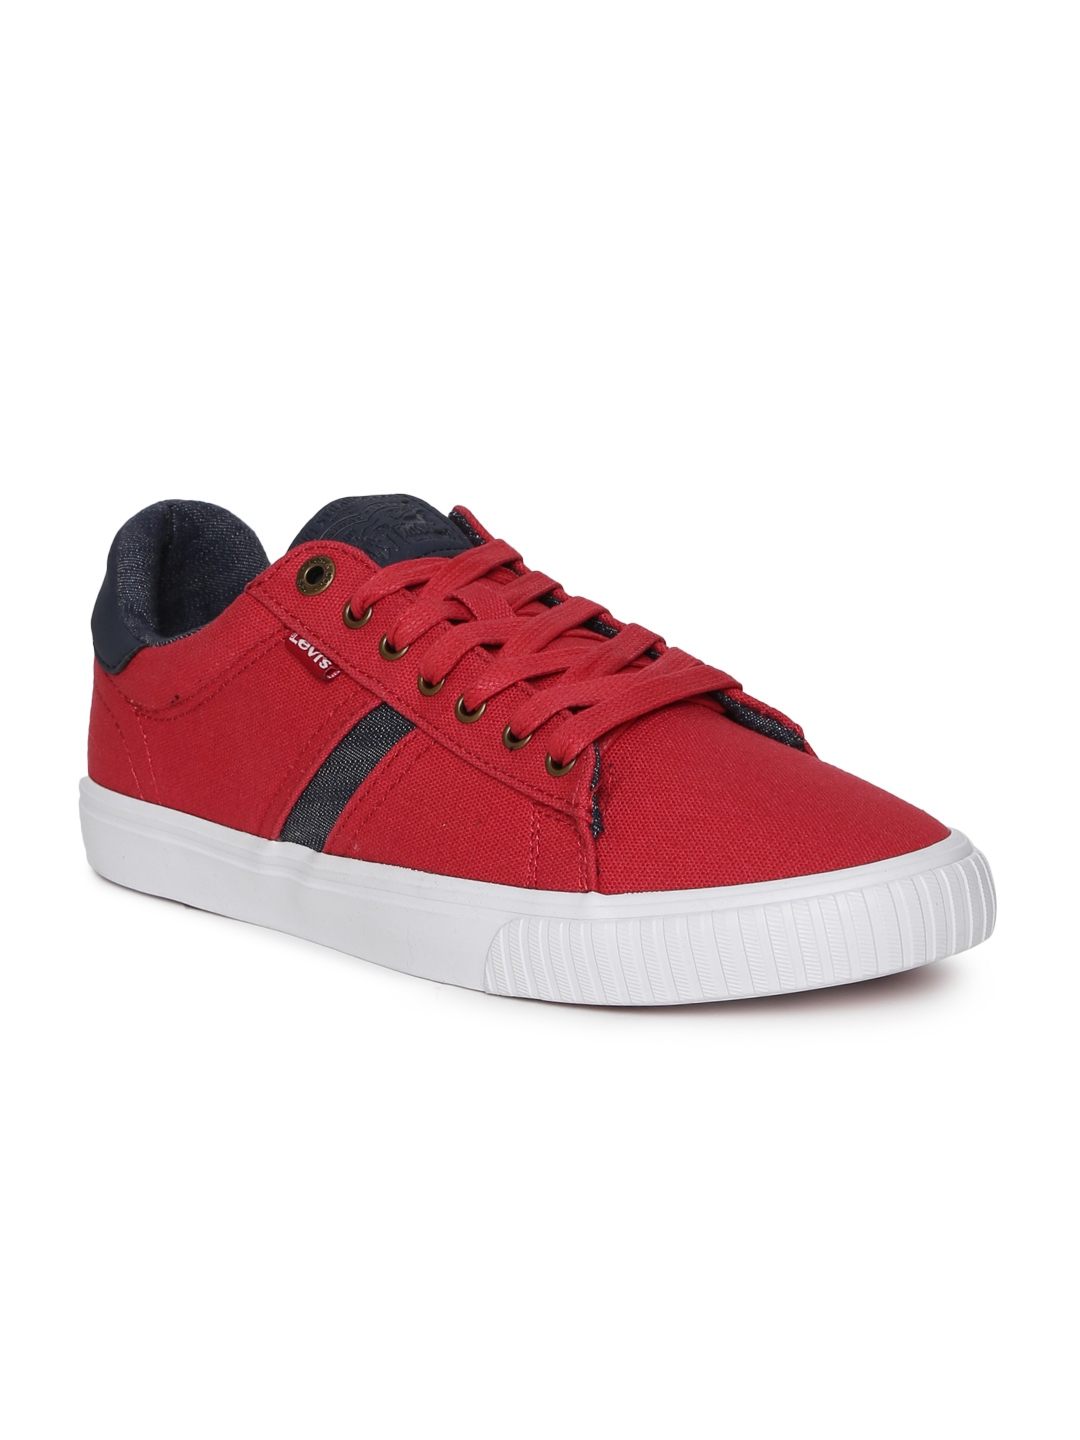 levis shoes red